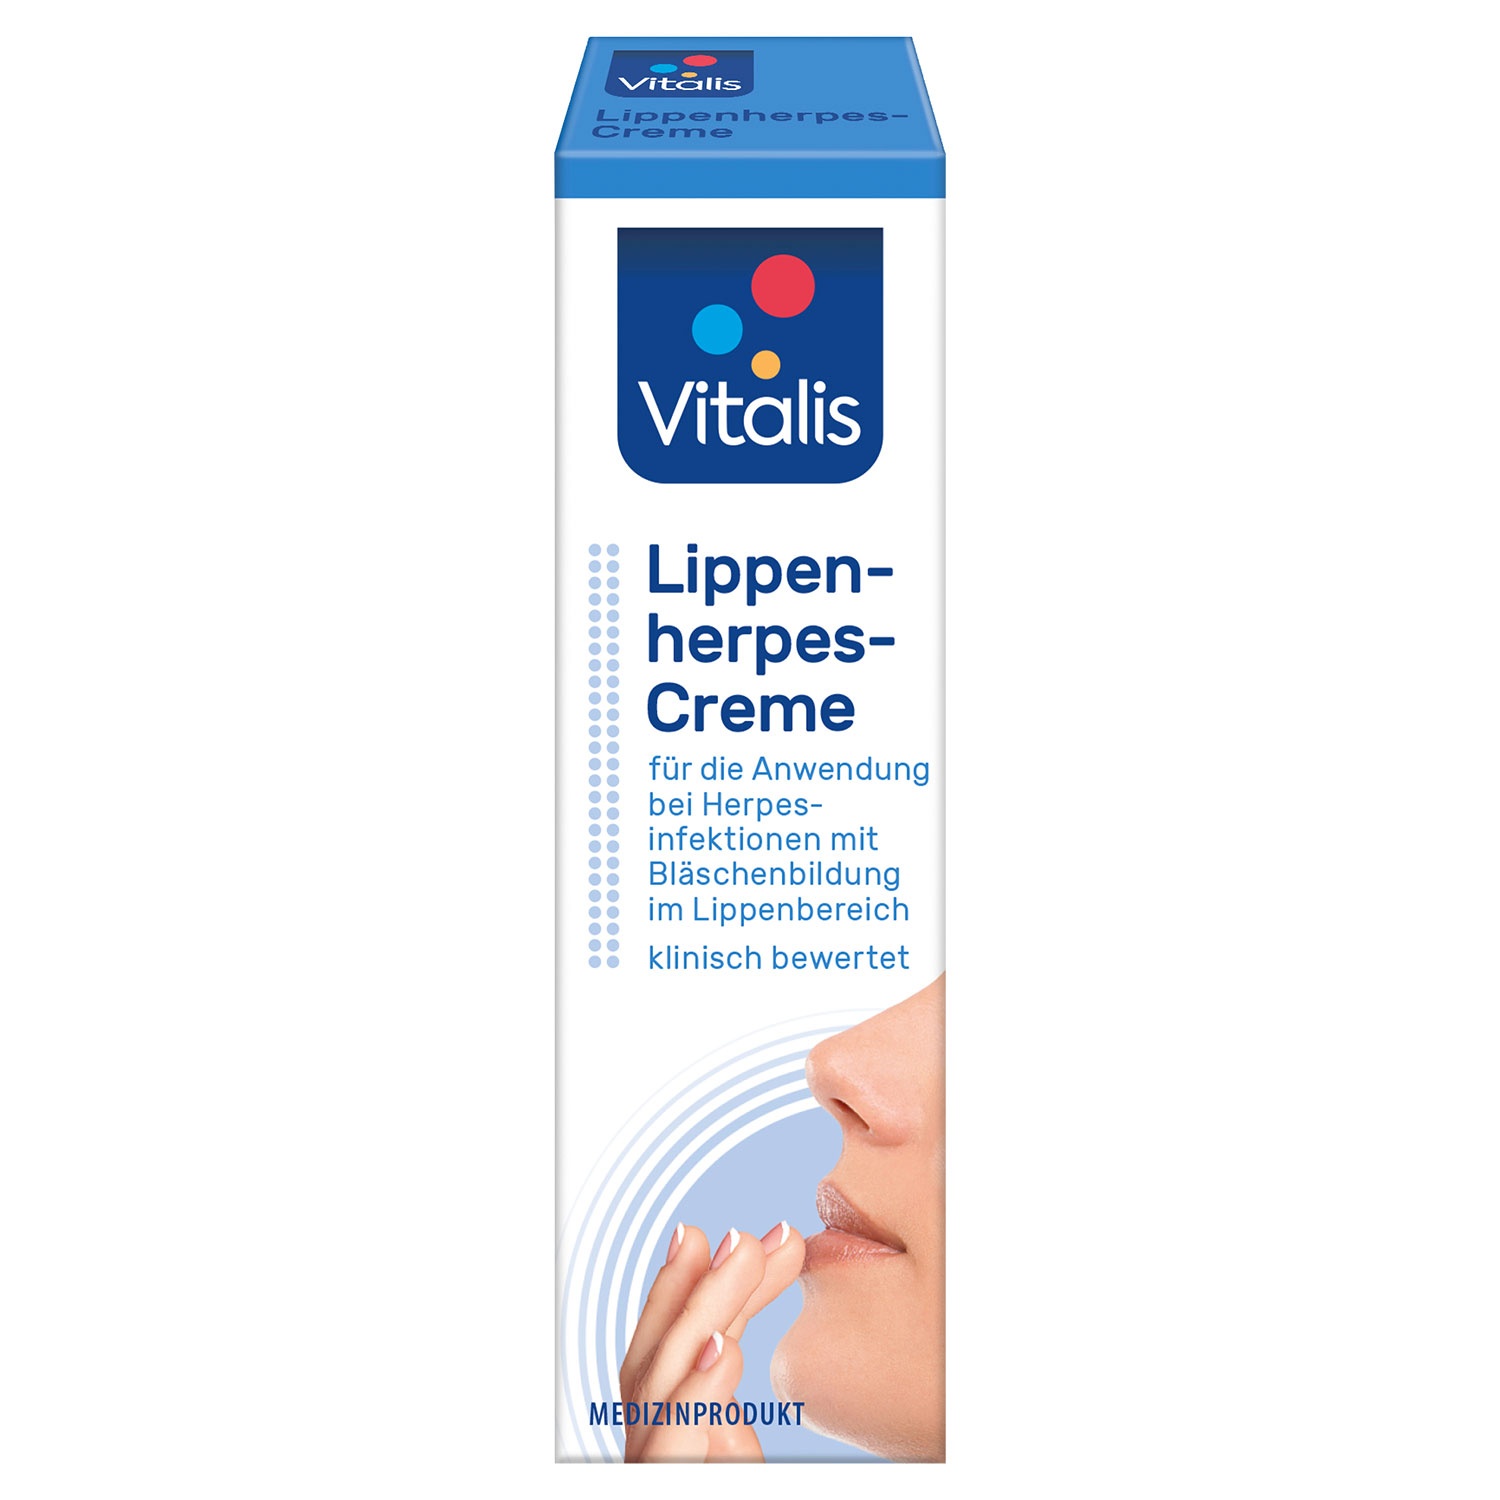 VITALIS Lippenherpes-Patches oder -Creme 10 g